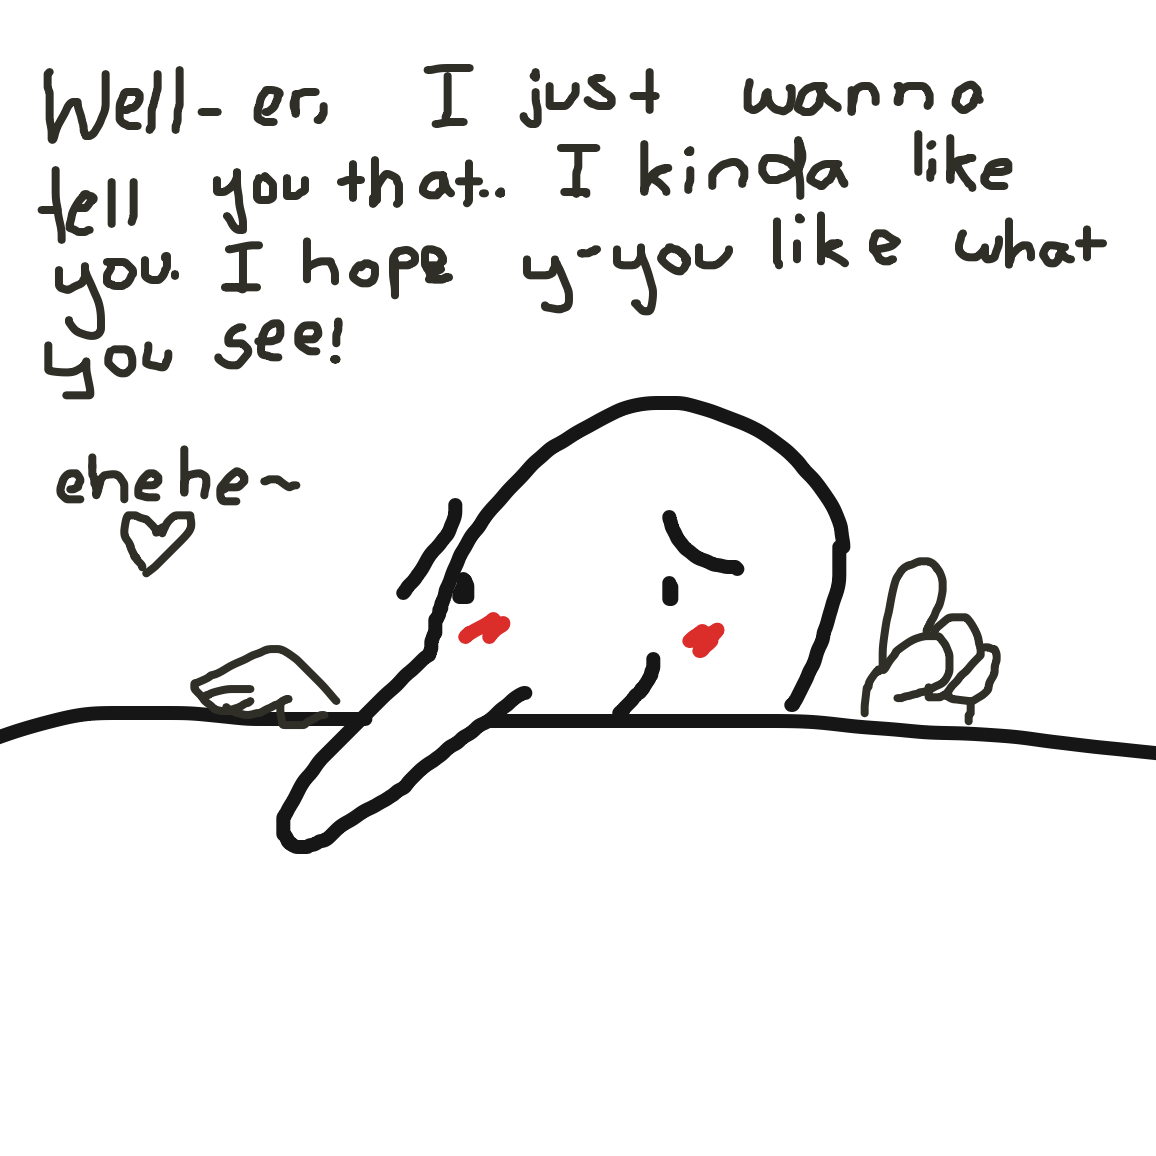 Kilroy... likes you... ehehe - Online Drawing Game Comic Strip Panel by unfortunate fool